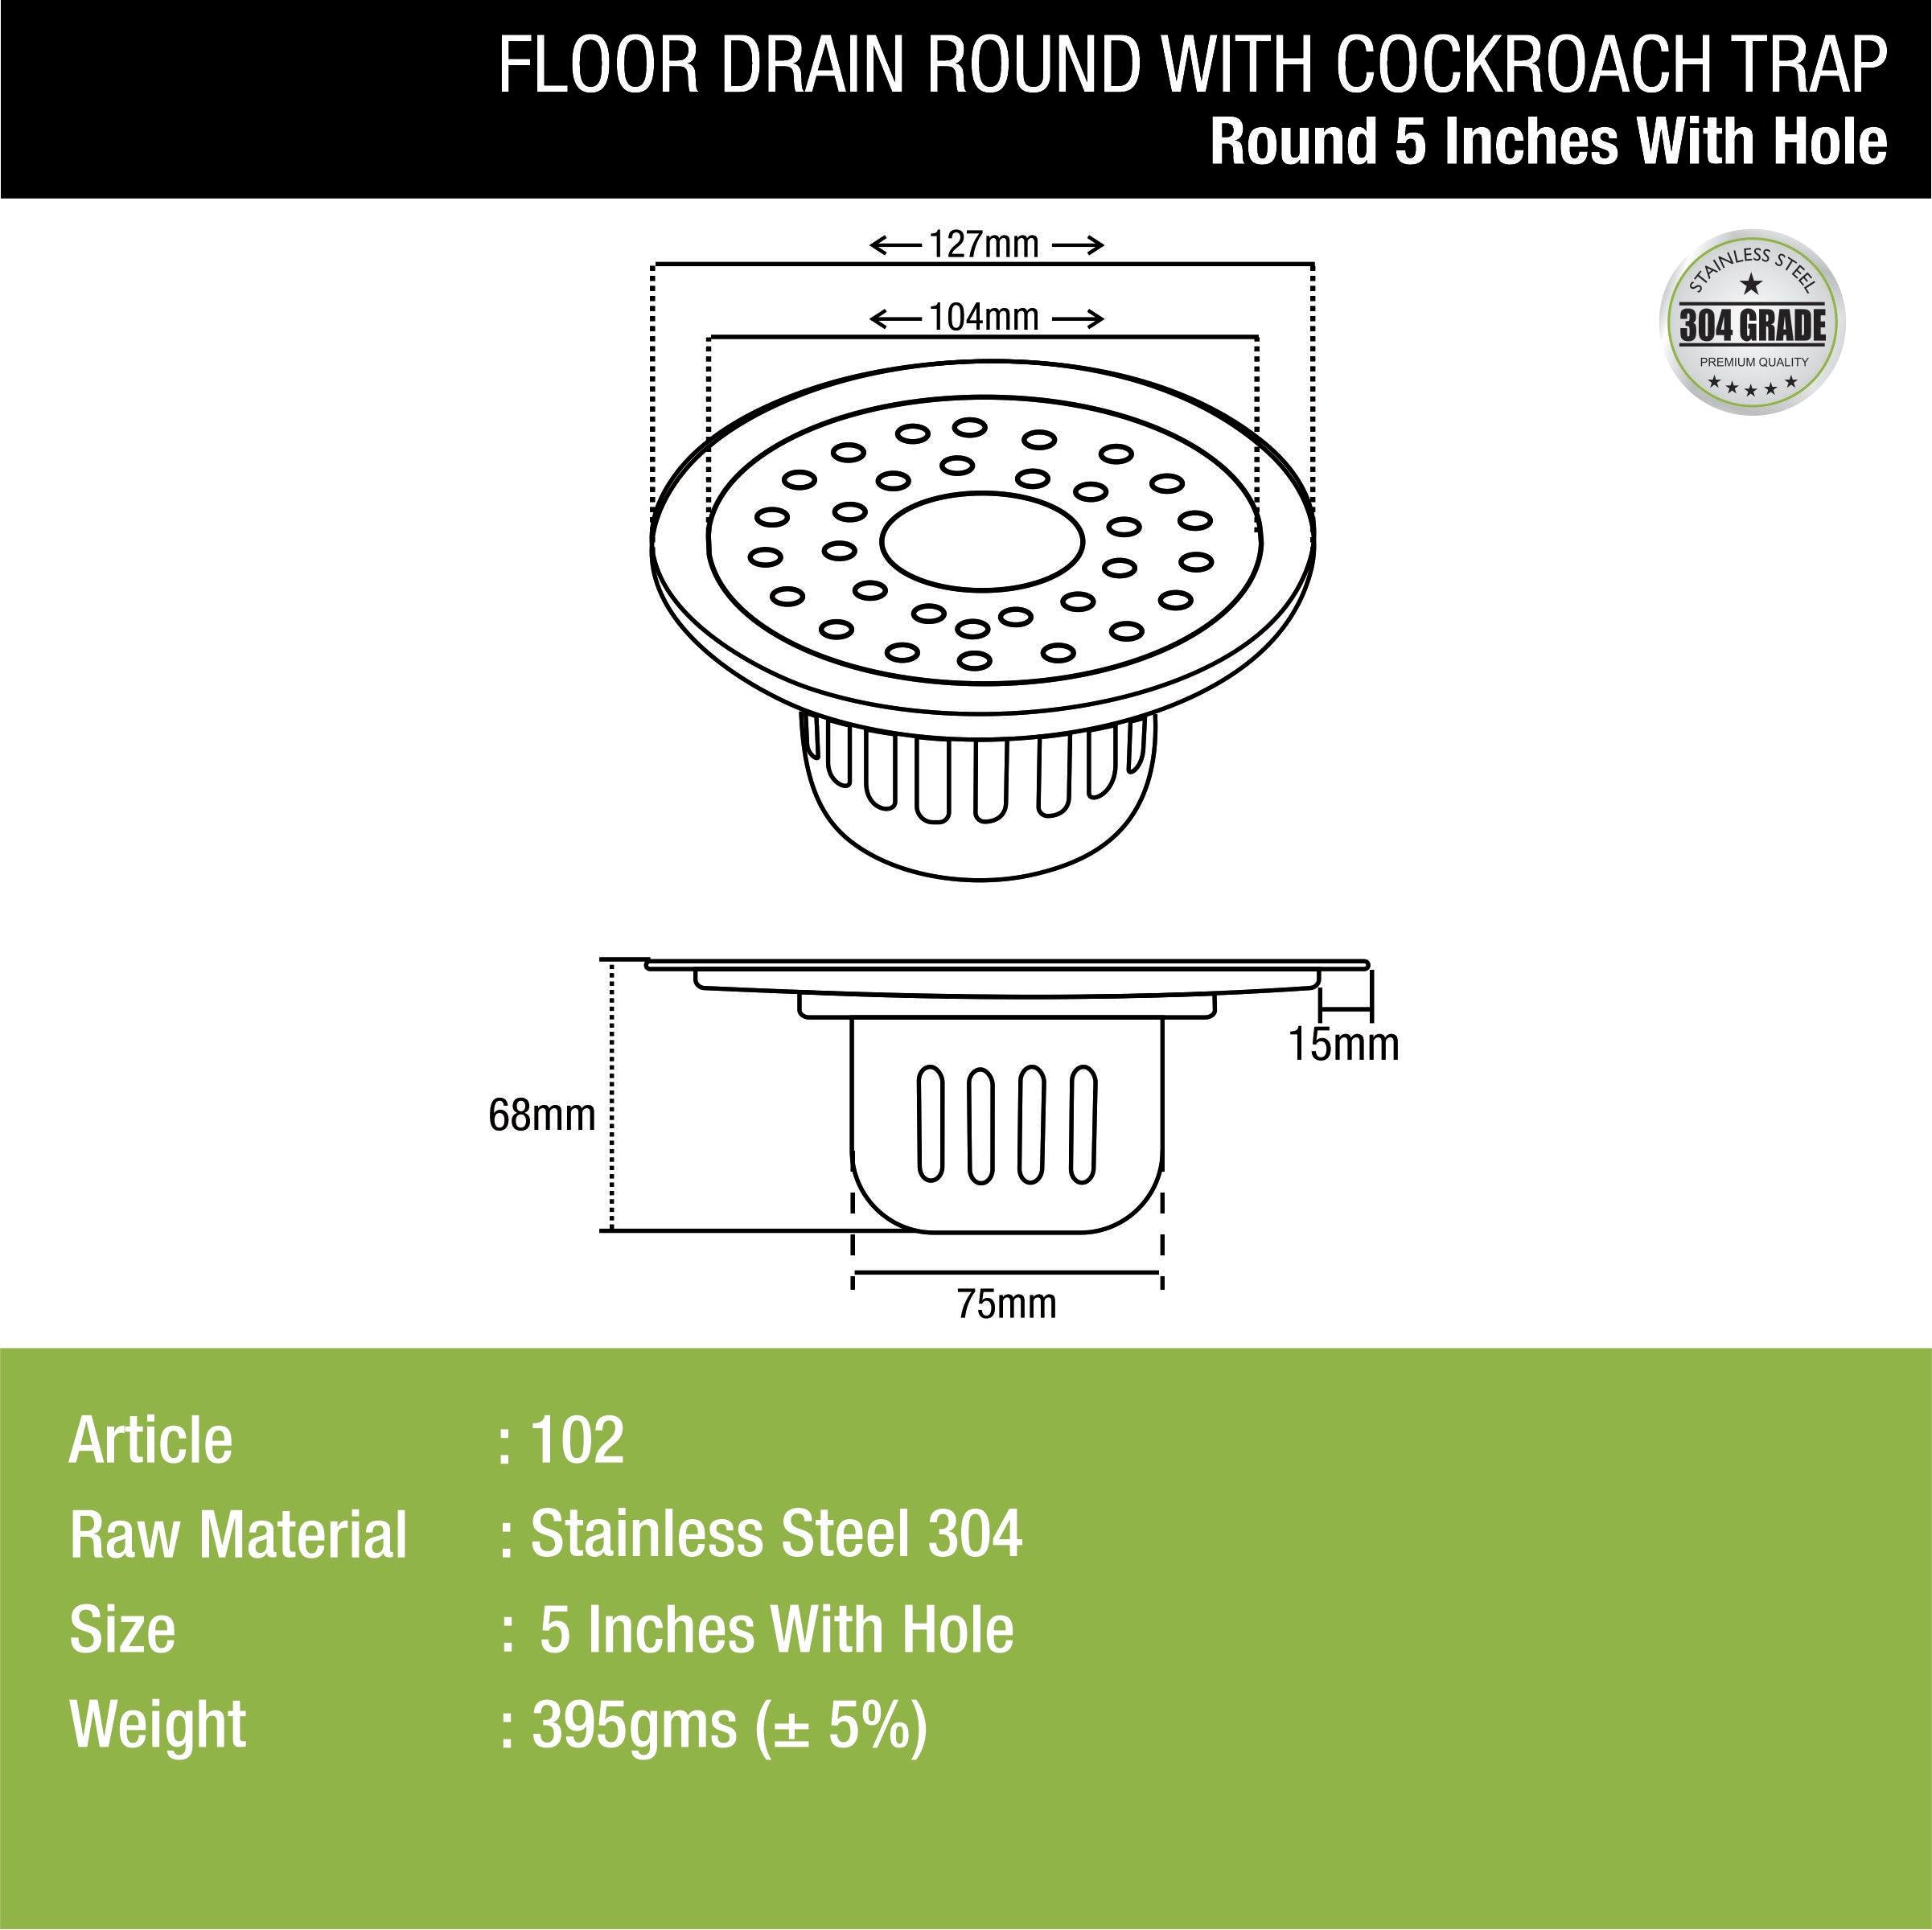 Round Floor Drain (5 inches) with Cockroach Trap & Hole dimensions and sizes